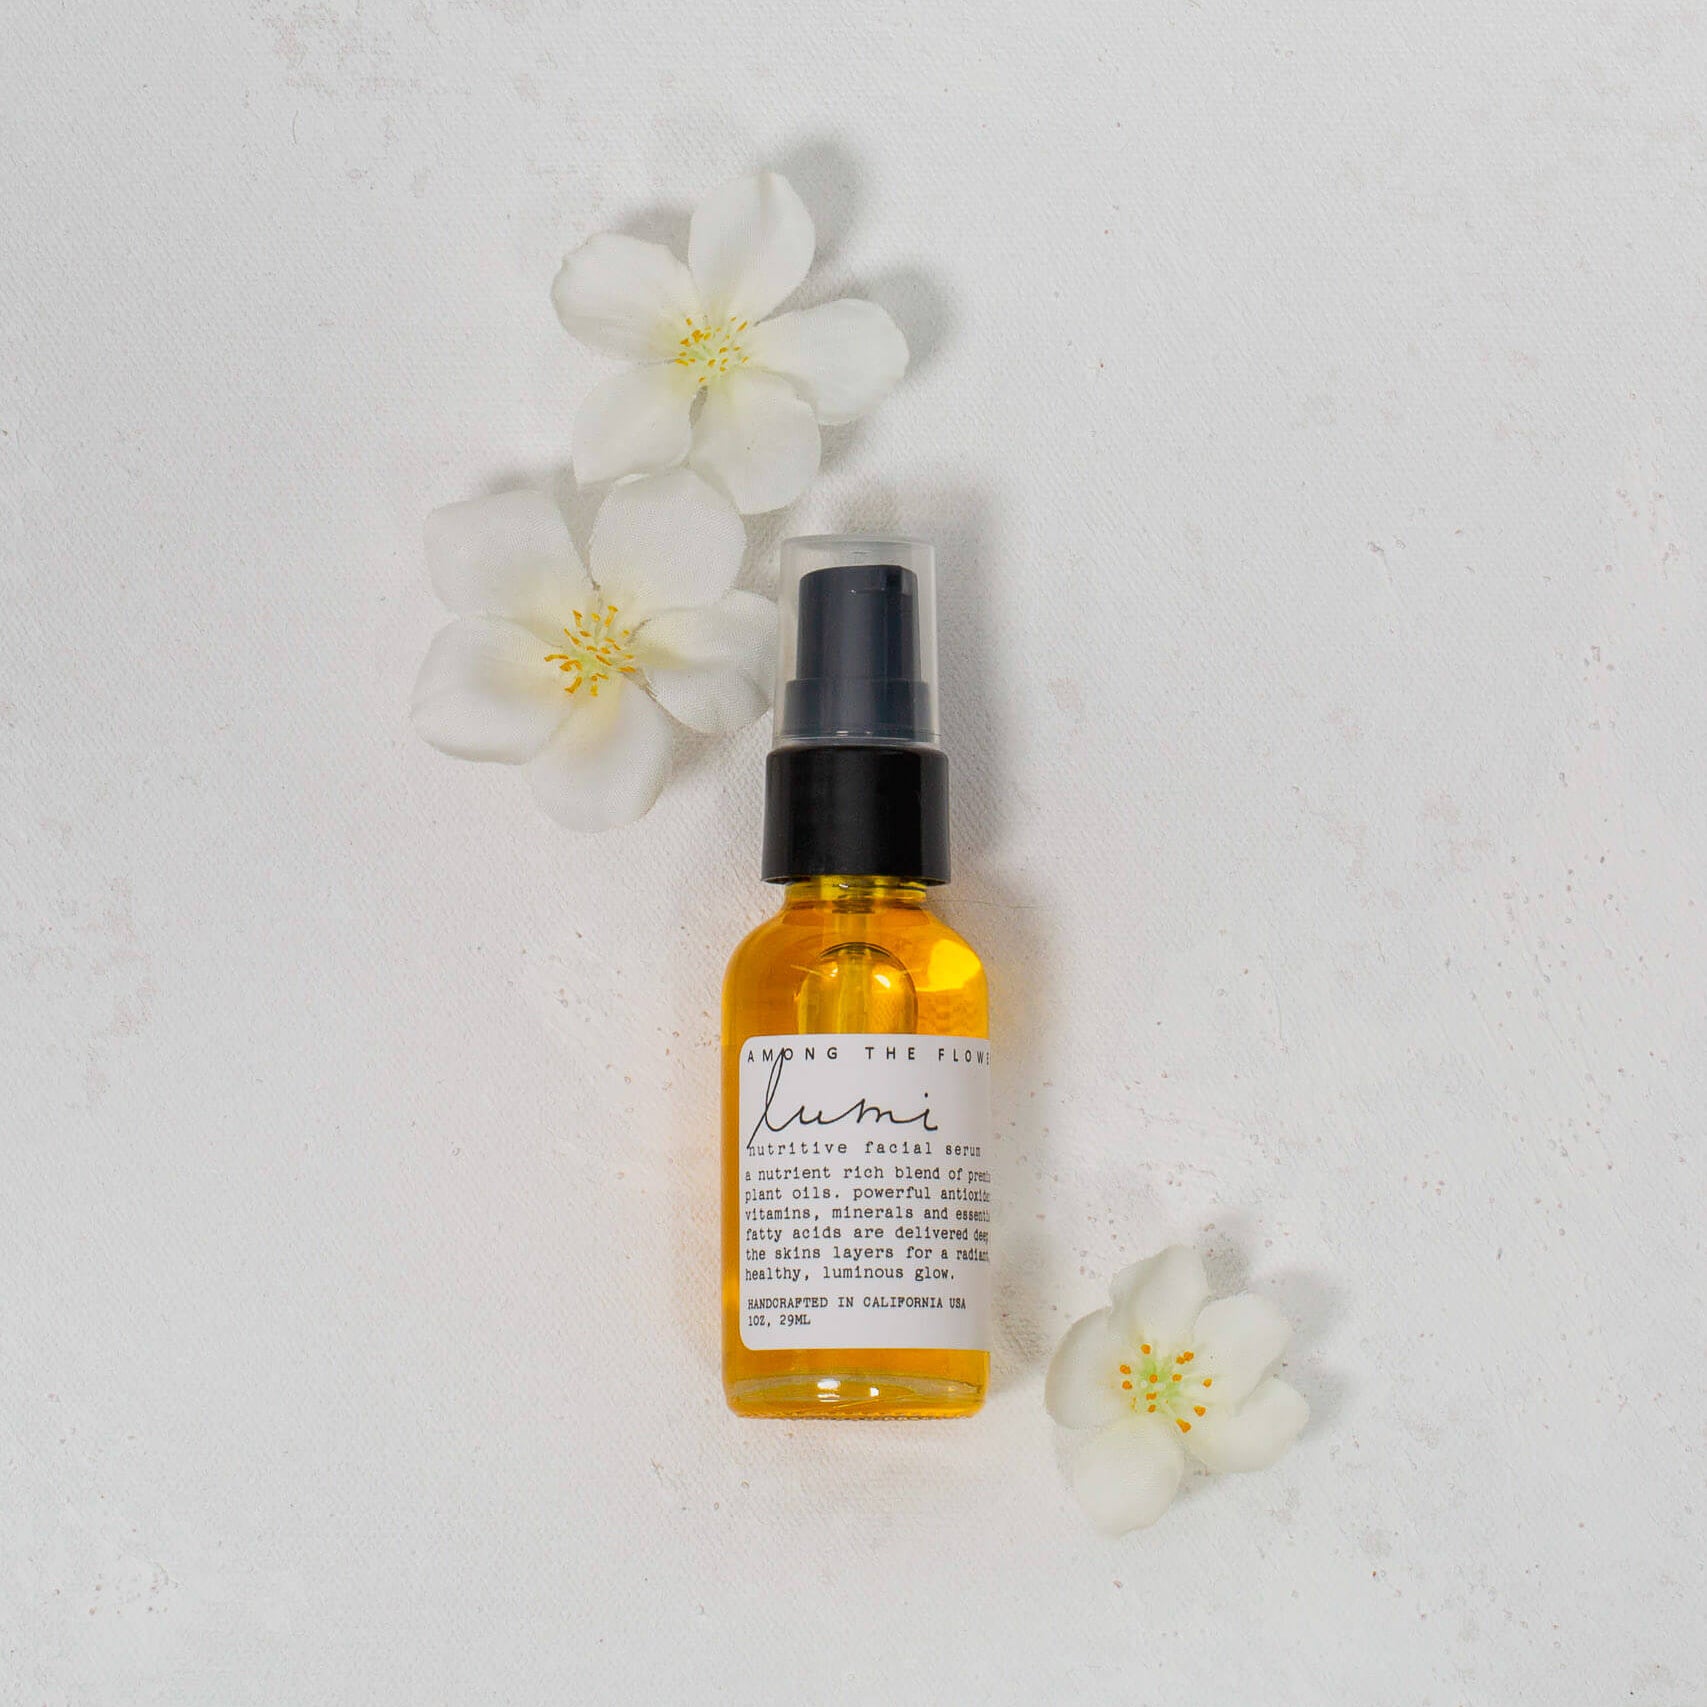 Lumi Facial Serum. Packed with naturally occurring antioxidants, amino acids, Vitamin A and c. A deeply moisturizing oil that softens skin. For heightened nutrient delivery pair with Rose Petal Hydrosol to tone and one of our cleansing alternatives to cleanse skin for optimum skin health.